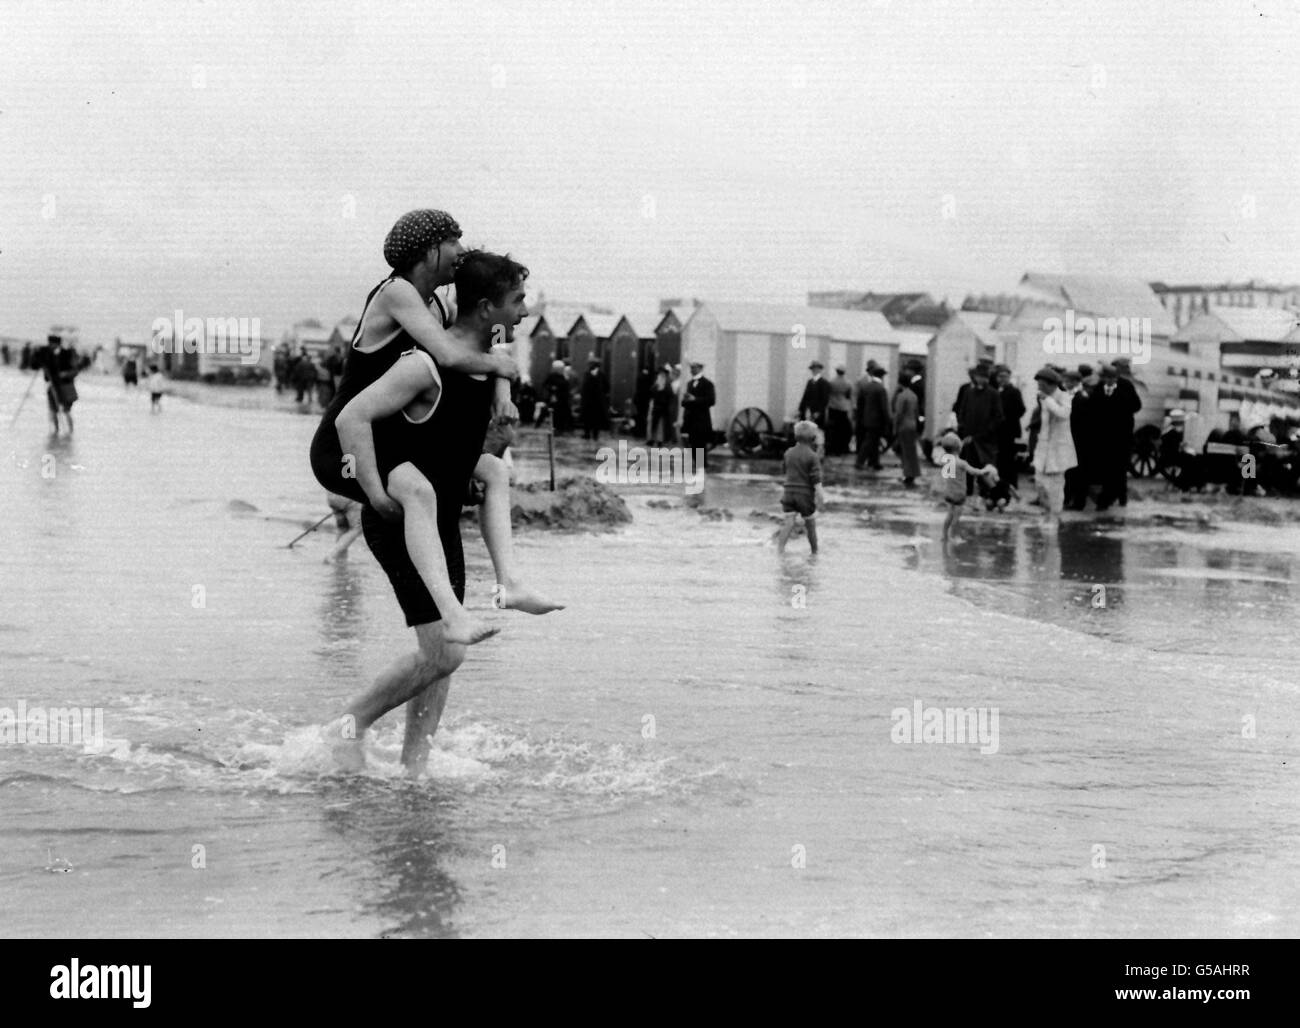 SEA BATHING: A man gives a woman a piggy back as they paddle through the water at a Belgian seaside resort. c1914. Stock Photo